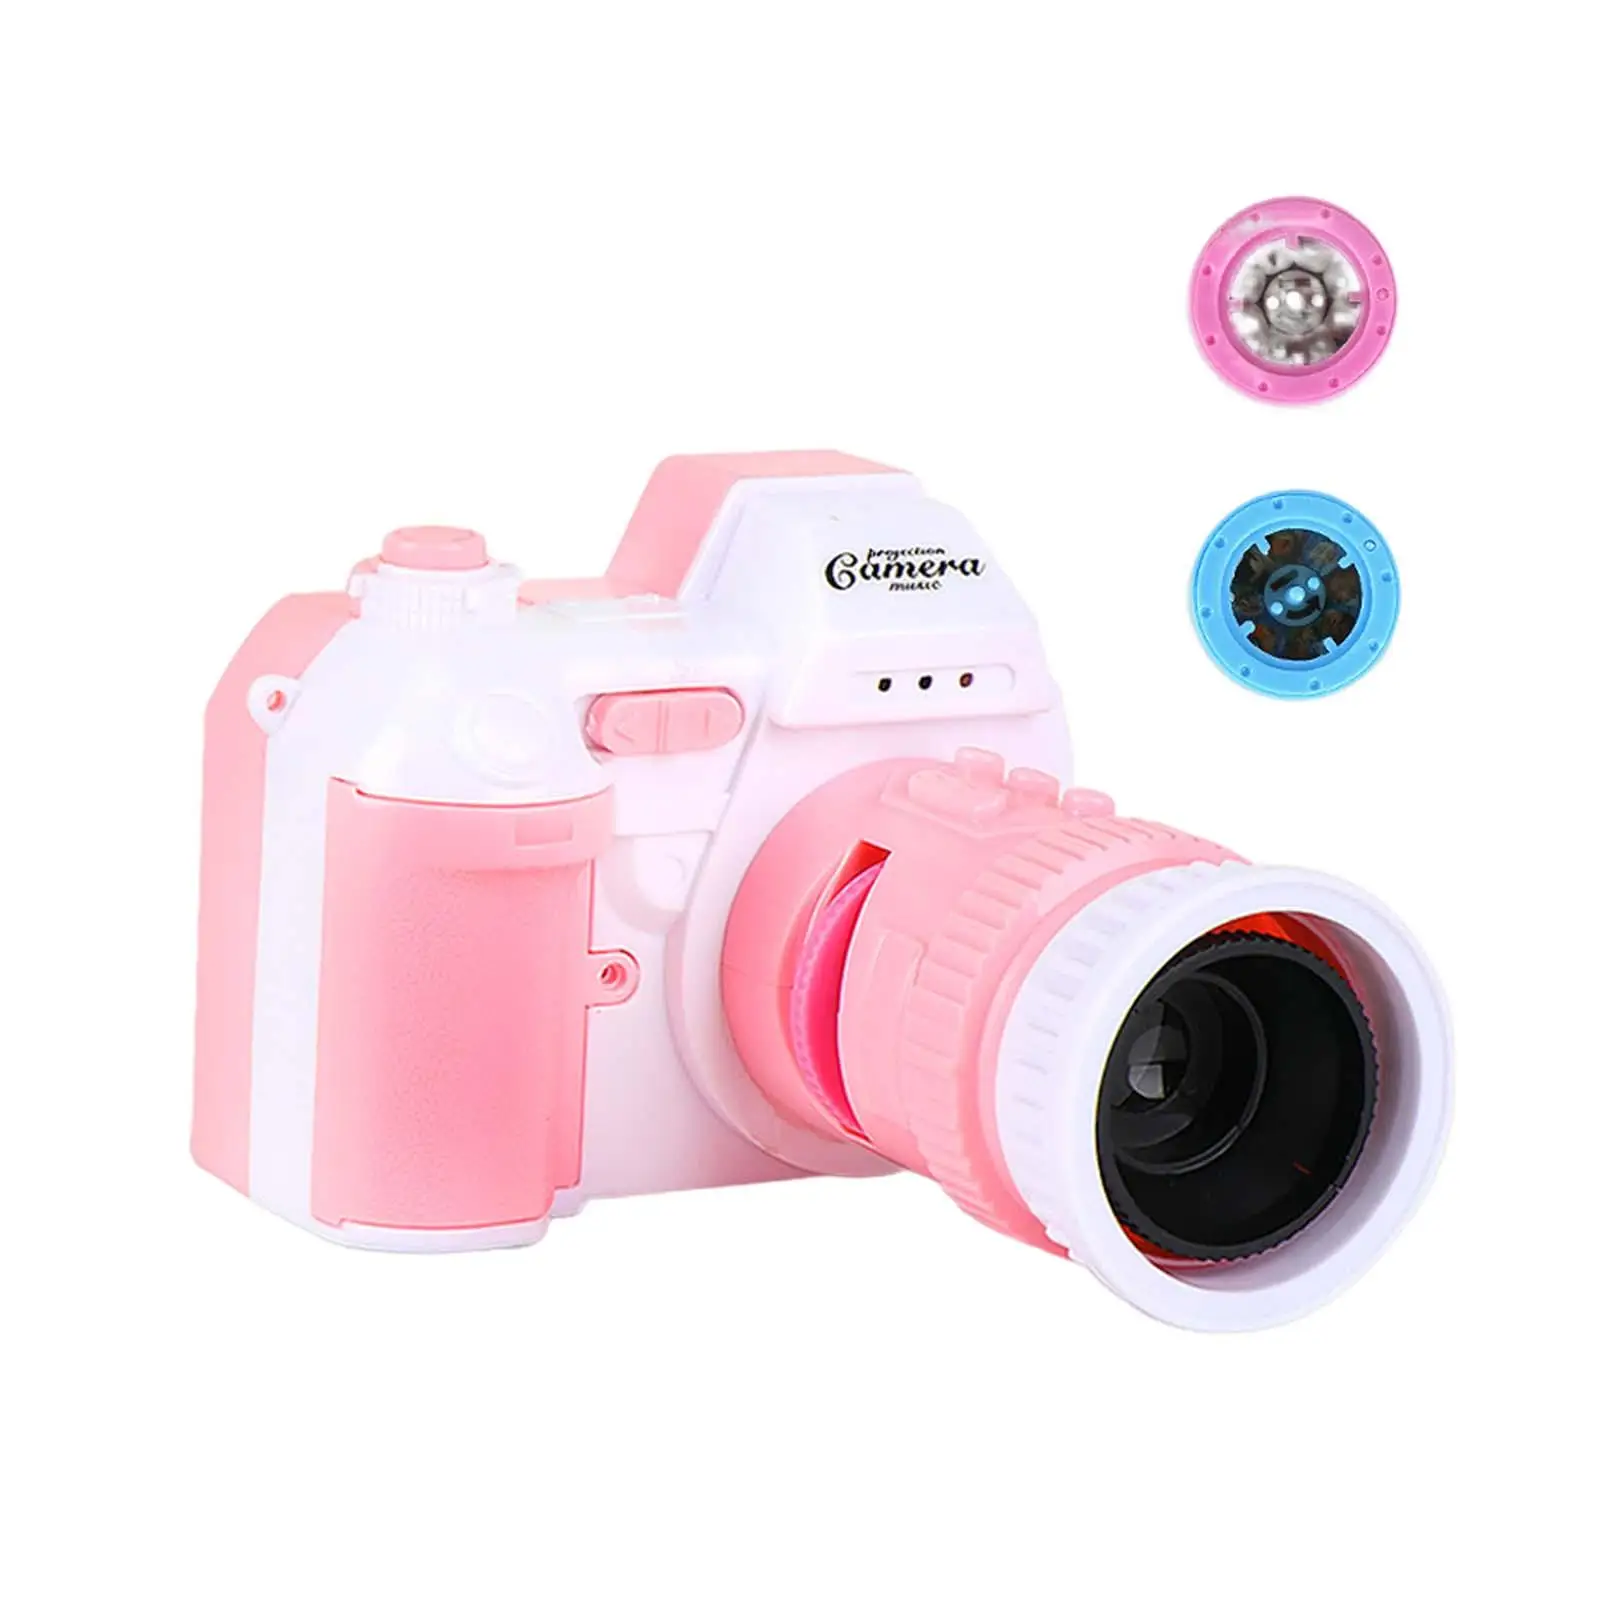 Mini Projection Camera Toy Educational Toy for Children Day Birthday Gifts